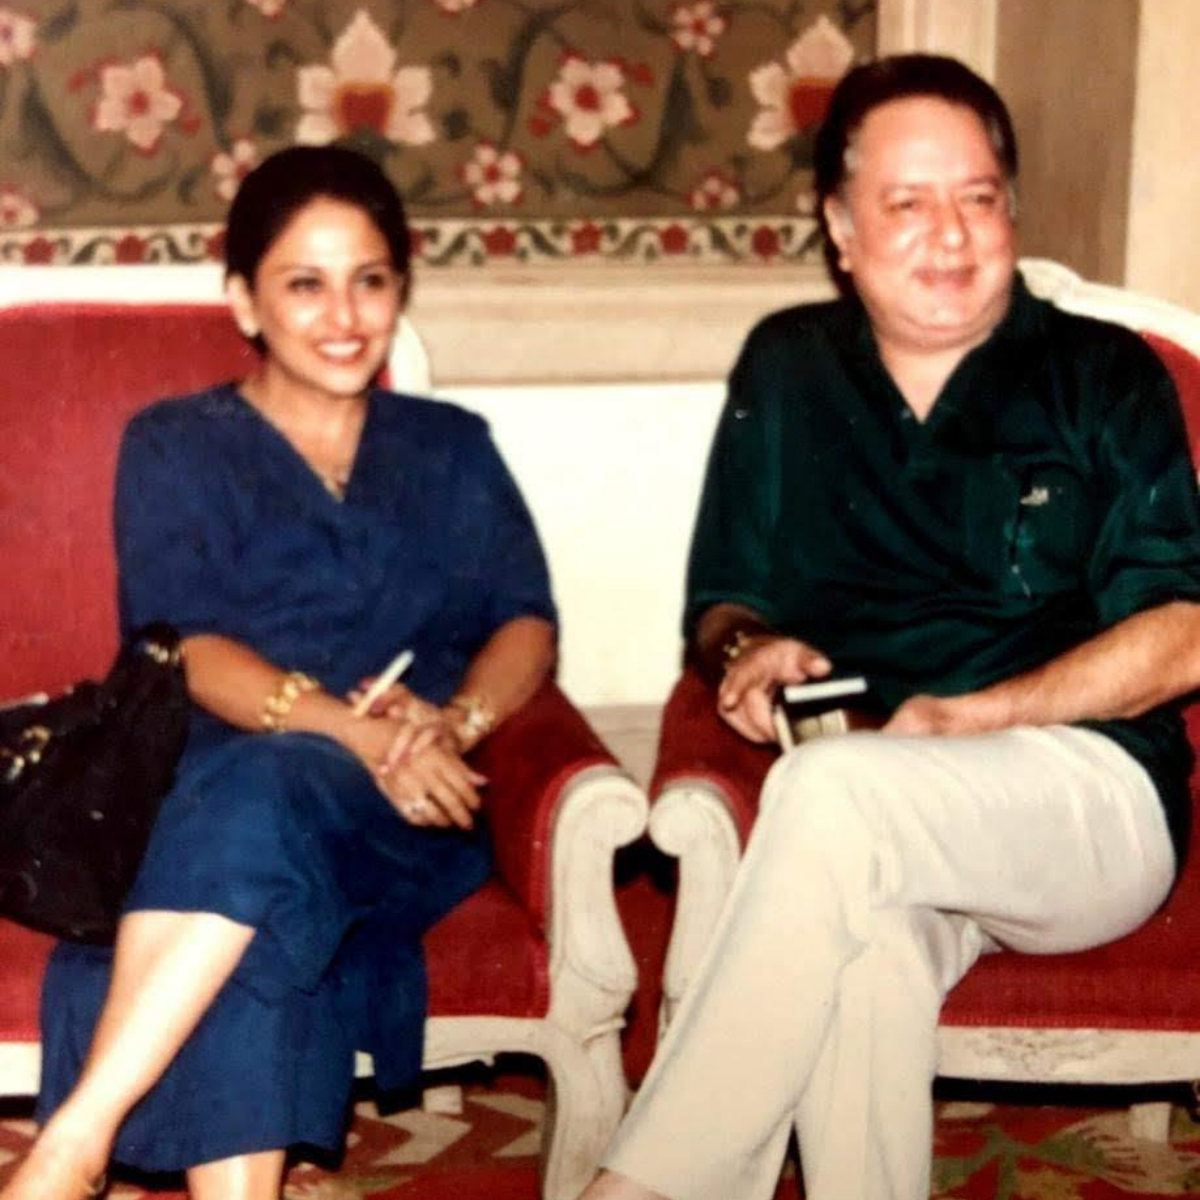 EXCLUSIVE: Navin Nischol was not capable of harming, says Anju Mahendroo on actor's 11th death anniversary